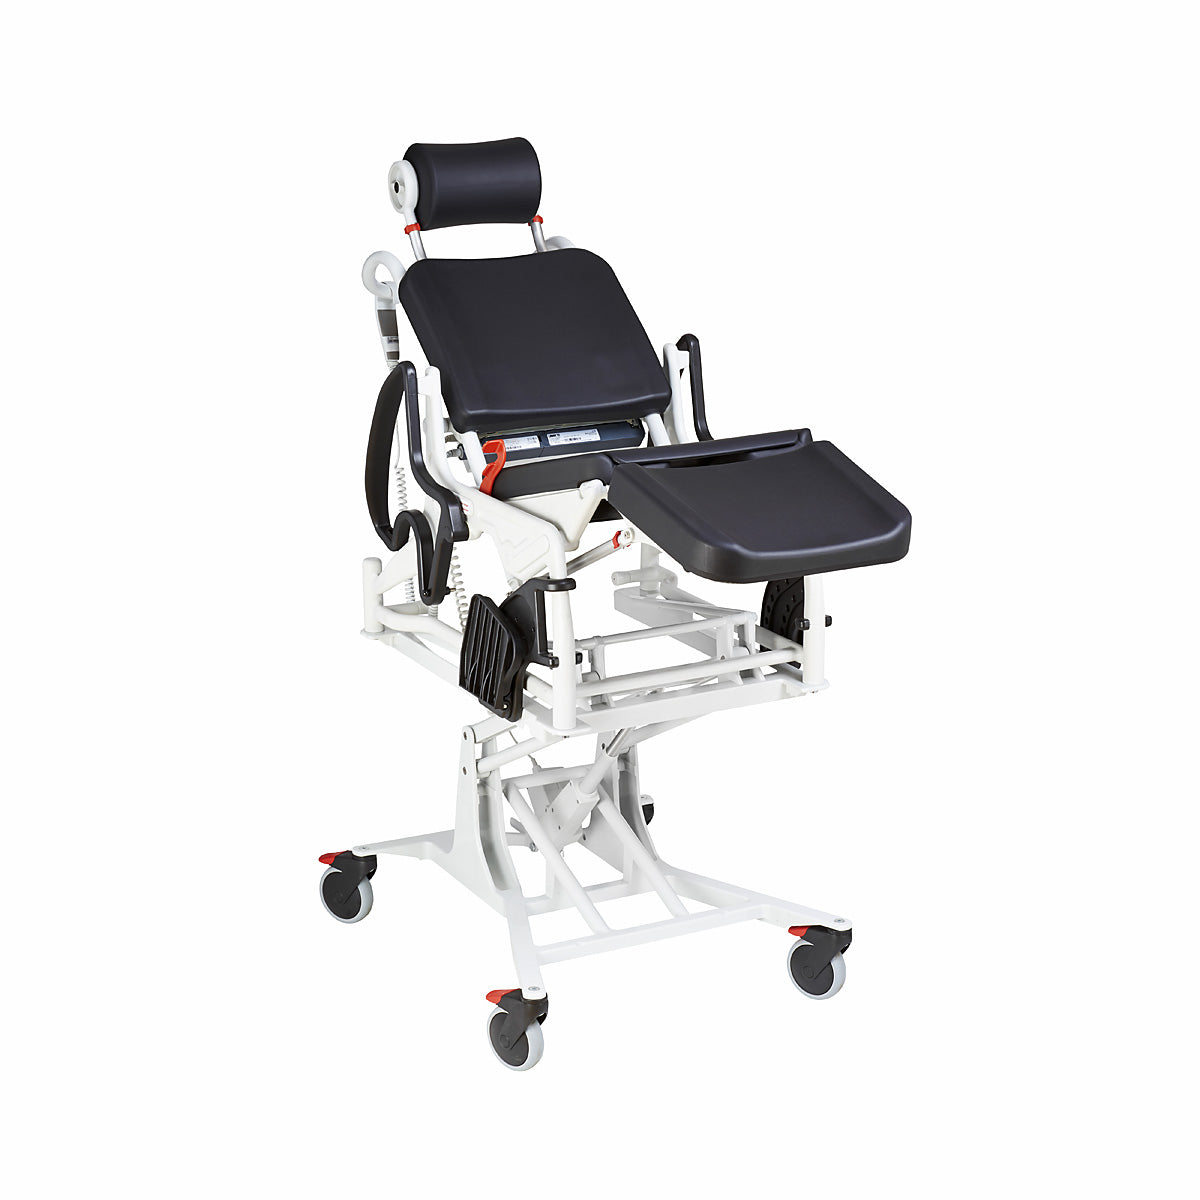 Rebotec Phoenix Multi - Tilt-in-Place and Electric Lift Commode Shower Chair